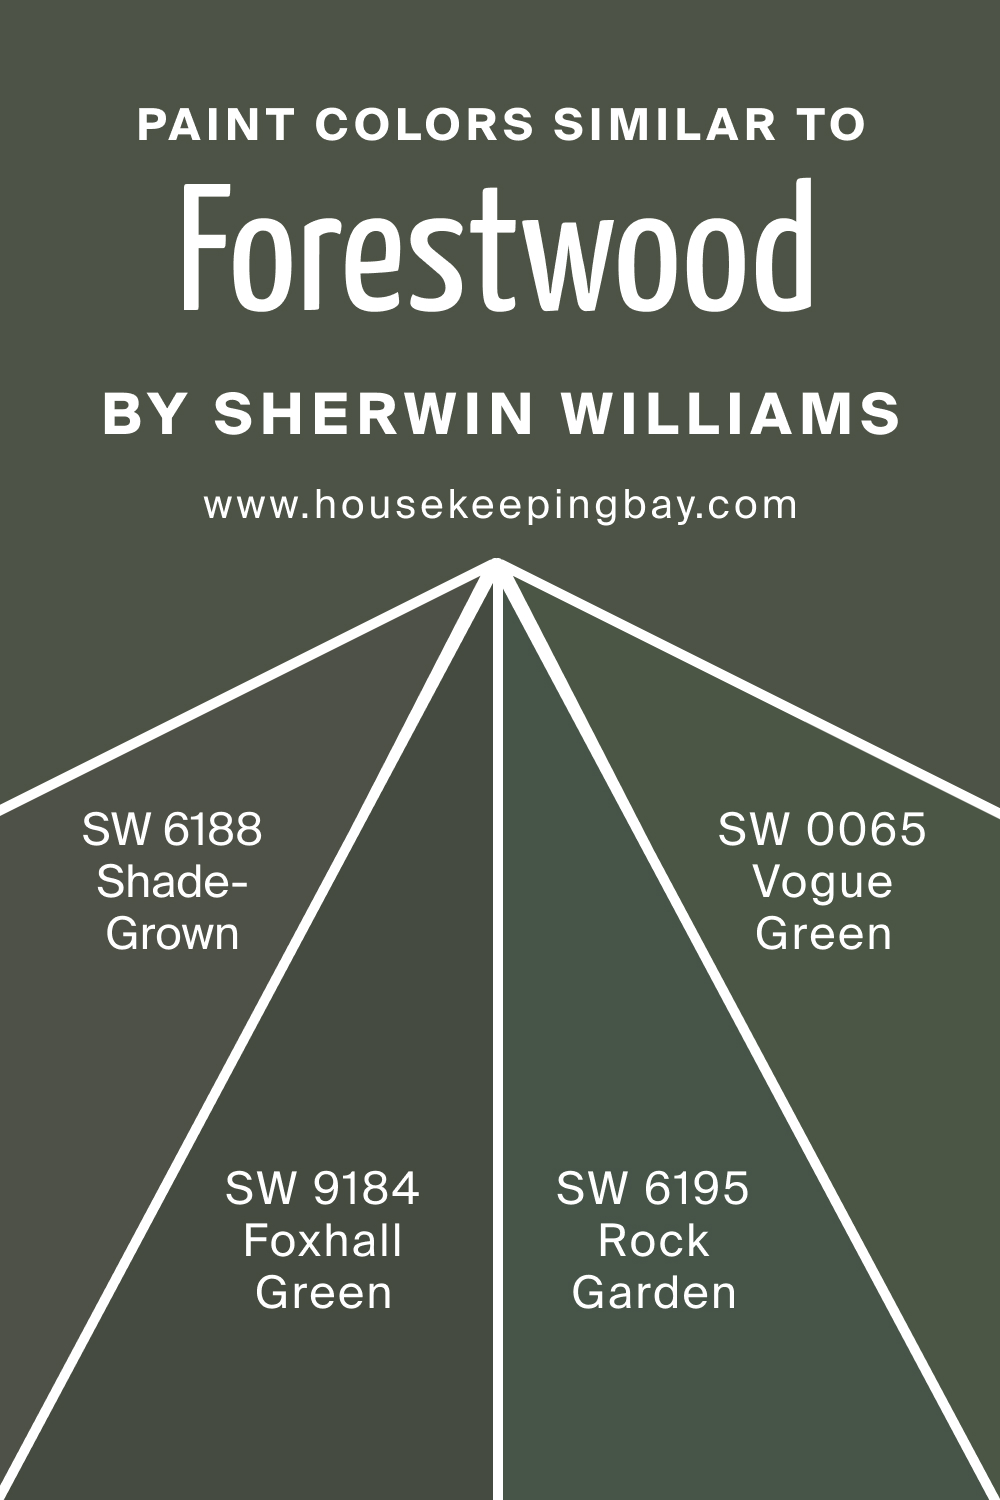 Paint Color Similar to SW 7730 Forestwood by Sherwin Williams